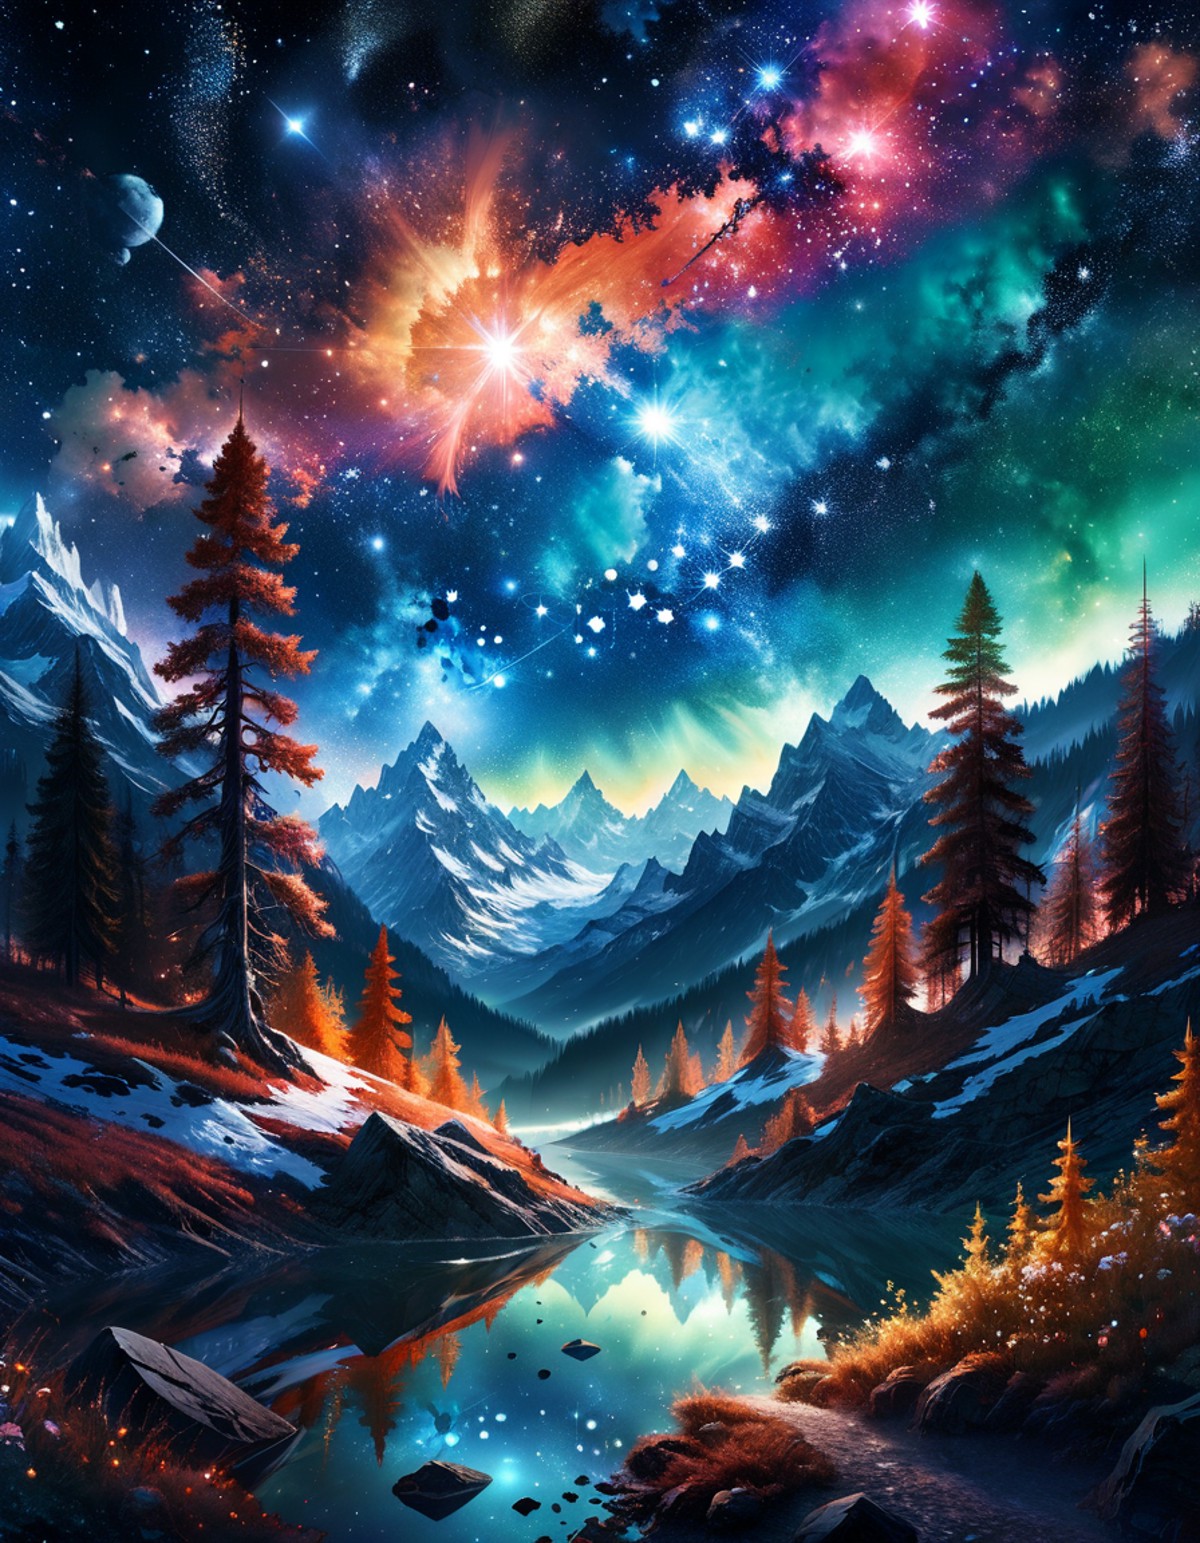 fantasy art by Chase Stone, sci-fi art, landscape of a Detailed Stimulating Austria from inside of a Taiga, Stars in the s...